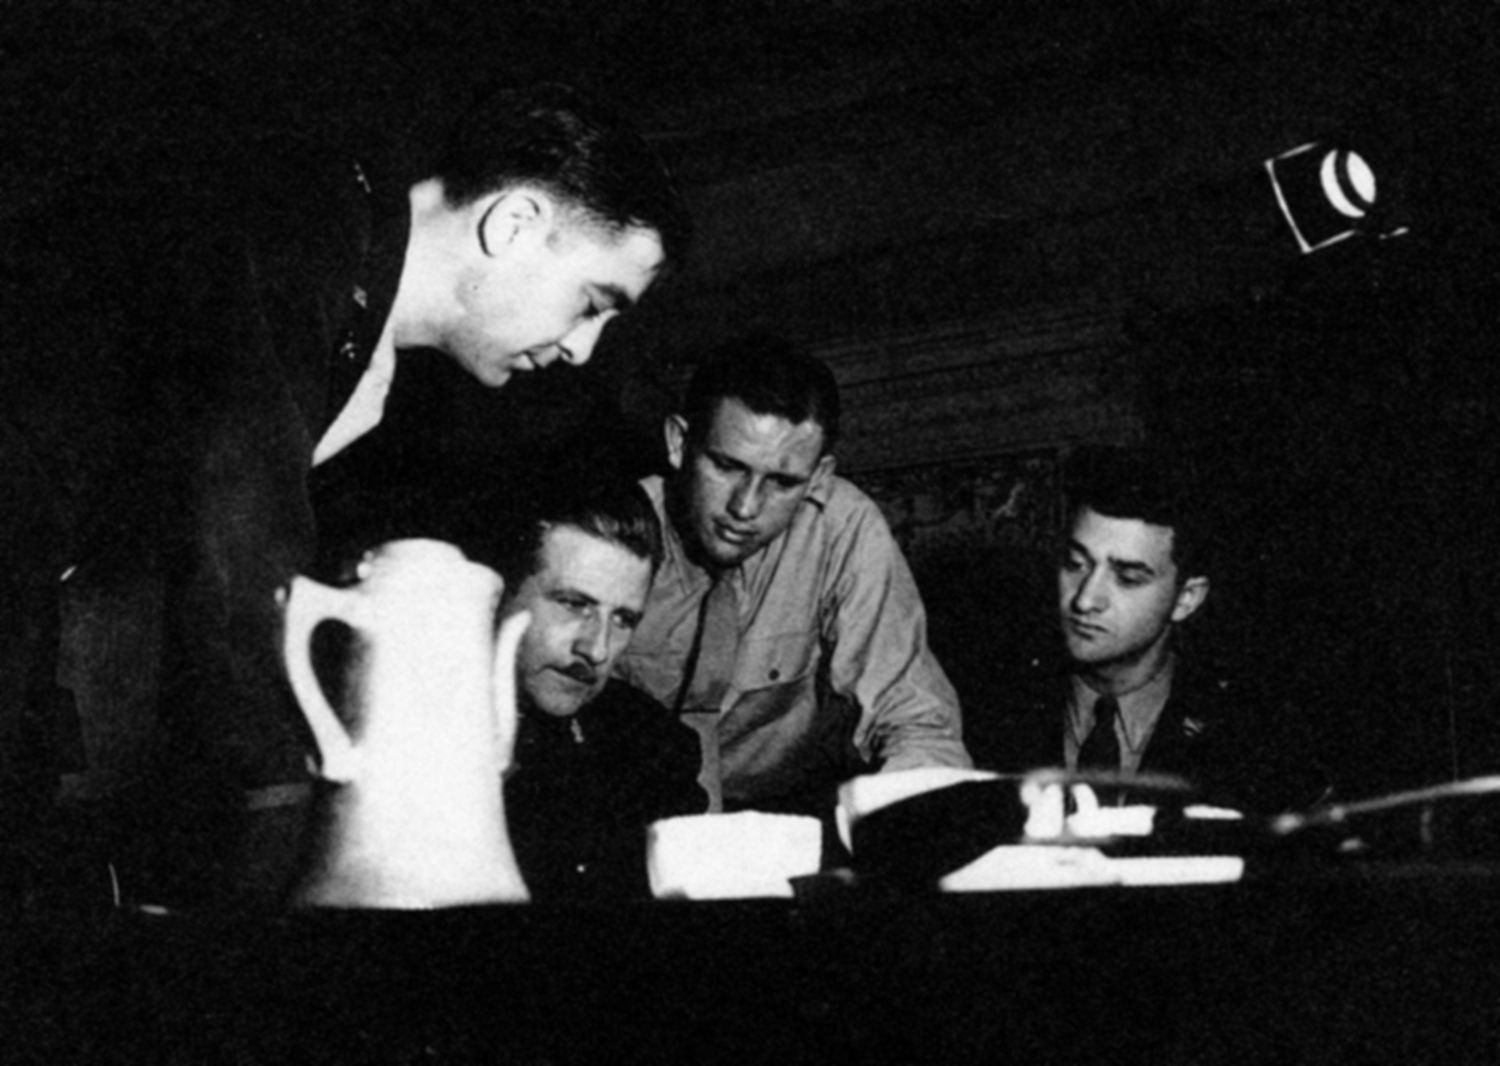 Before parachuting into occupied France, an OSS Jedburgh team is briefed on numerous topics. Agent John K. Singlaub is shown second from right. (Photos courtesy of John Singlaub)